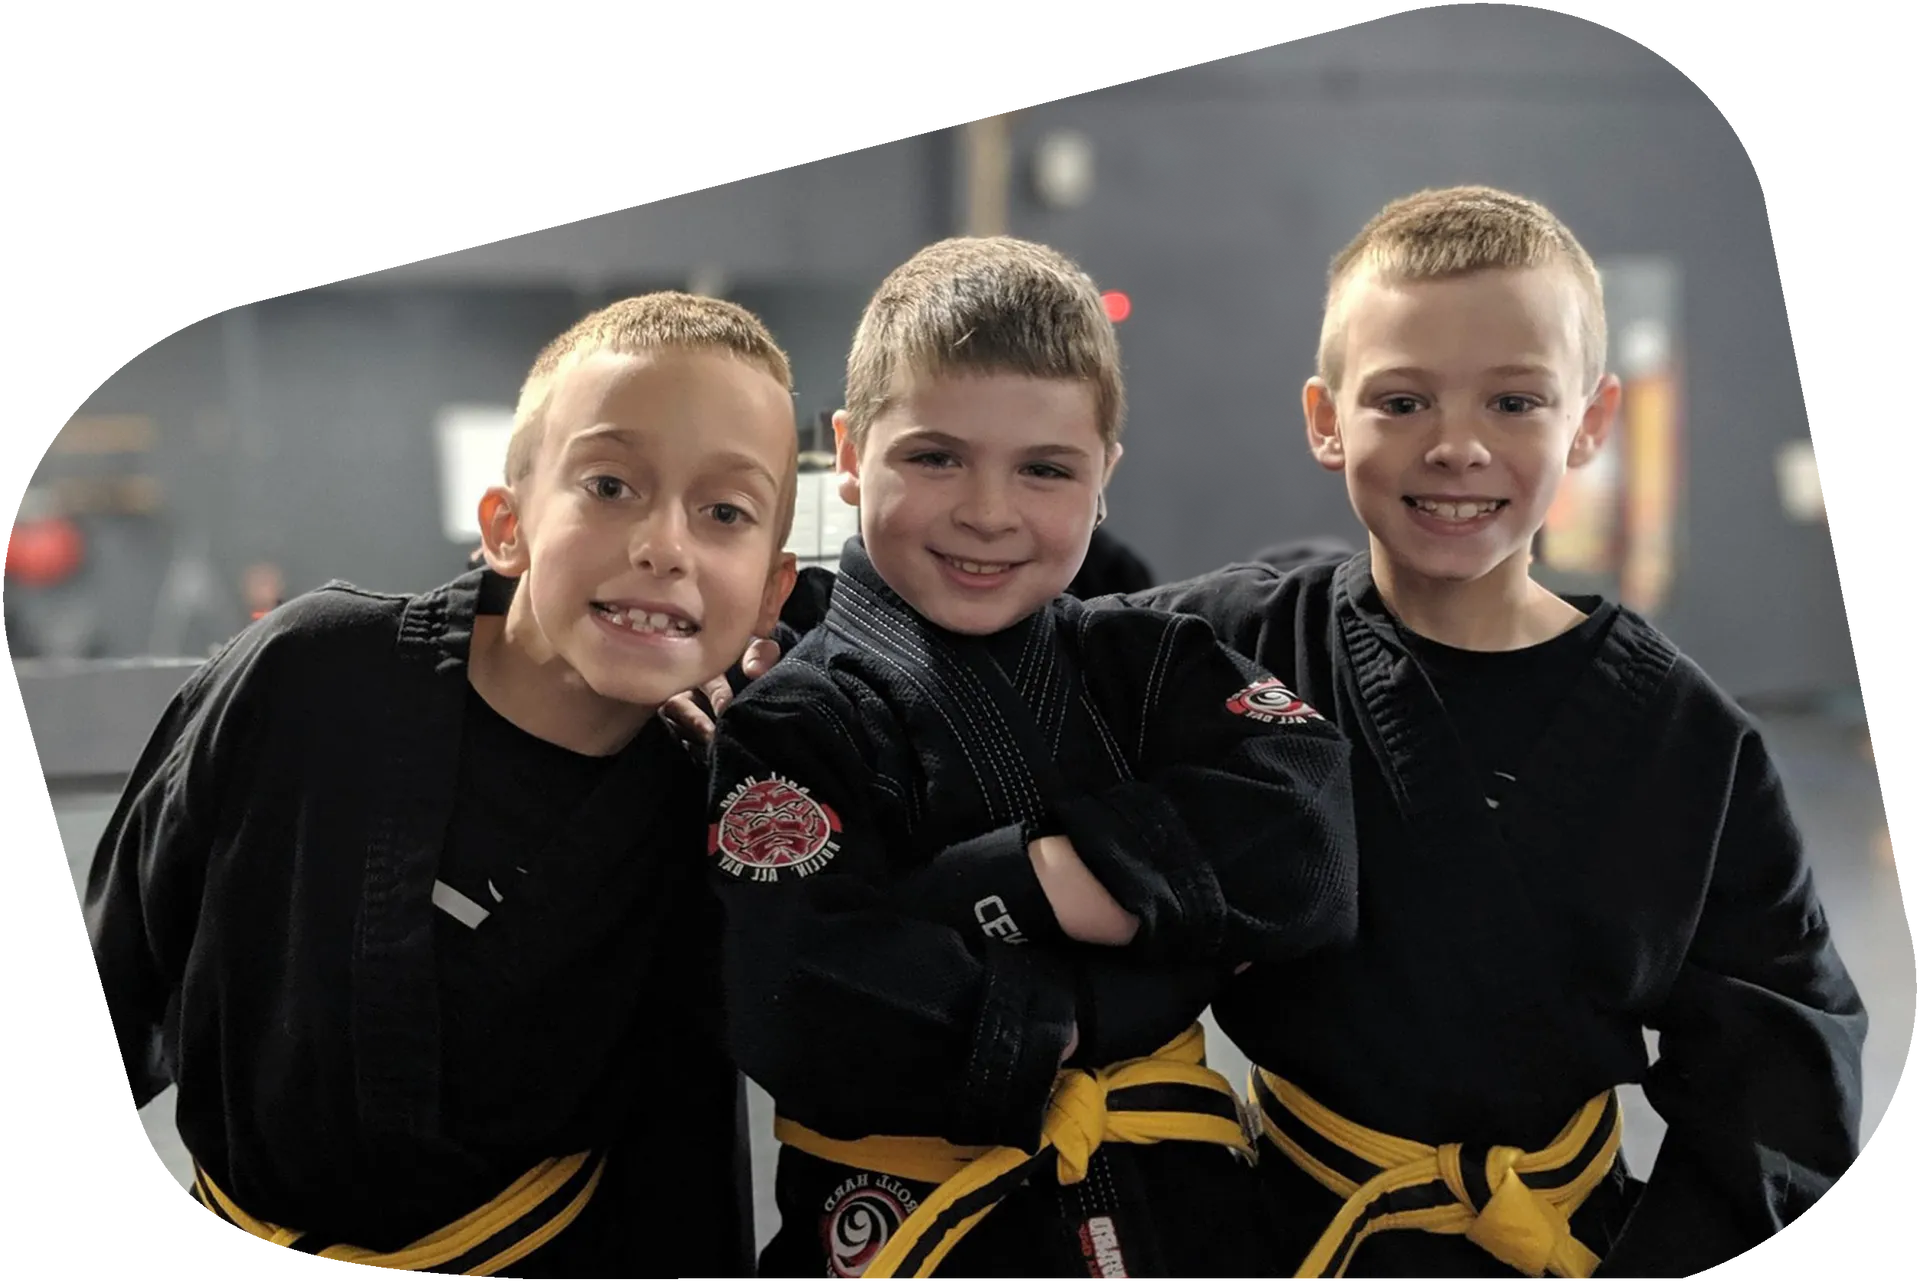 three young boys wearing black karate uniforms and yellow belts are posing for a picture .